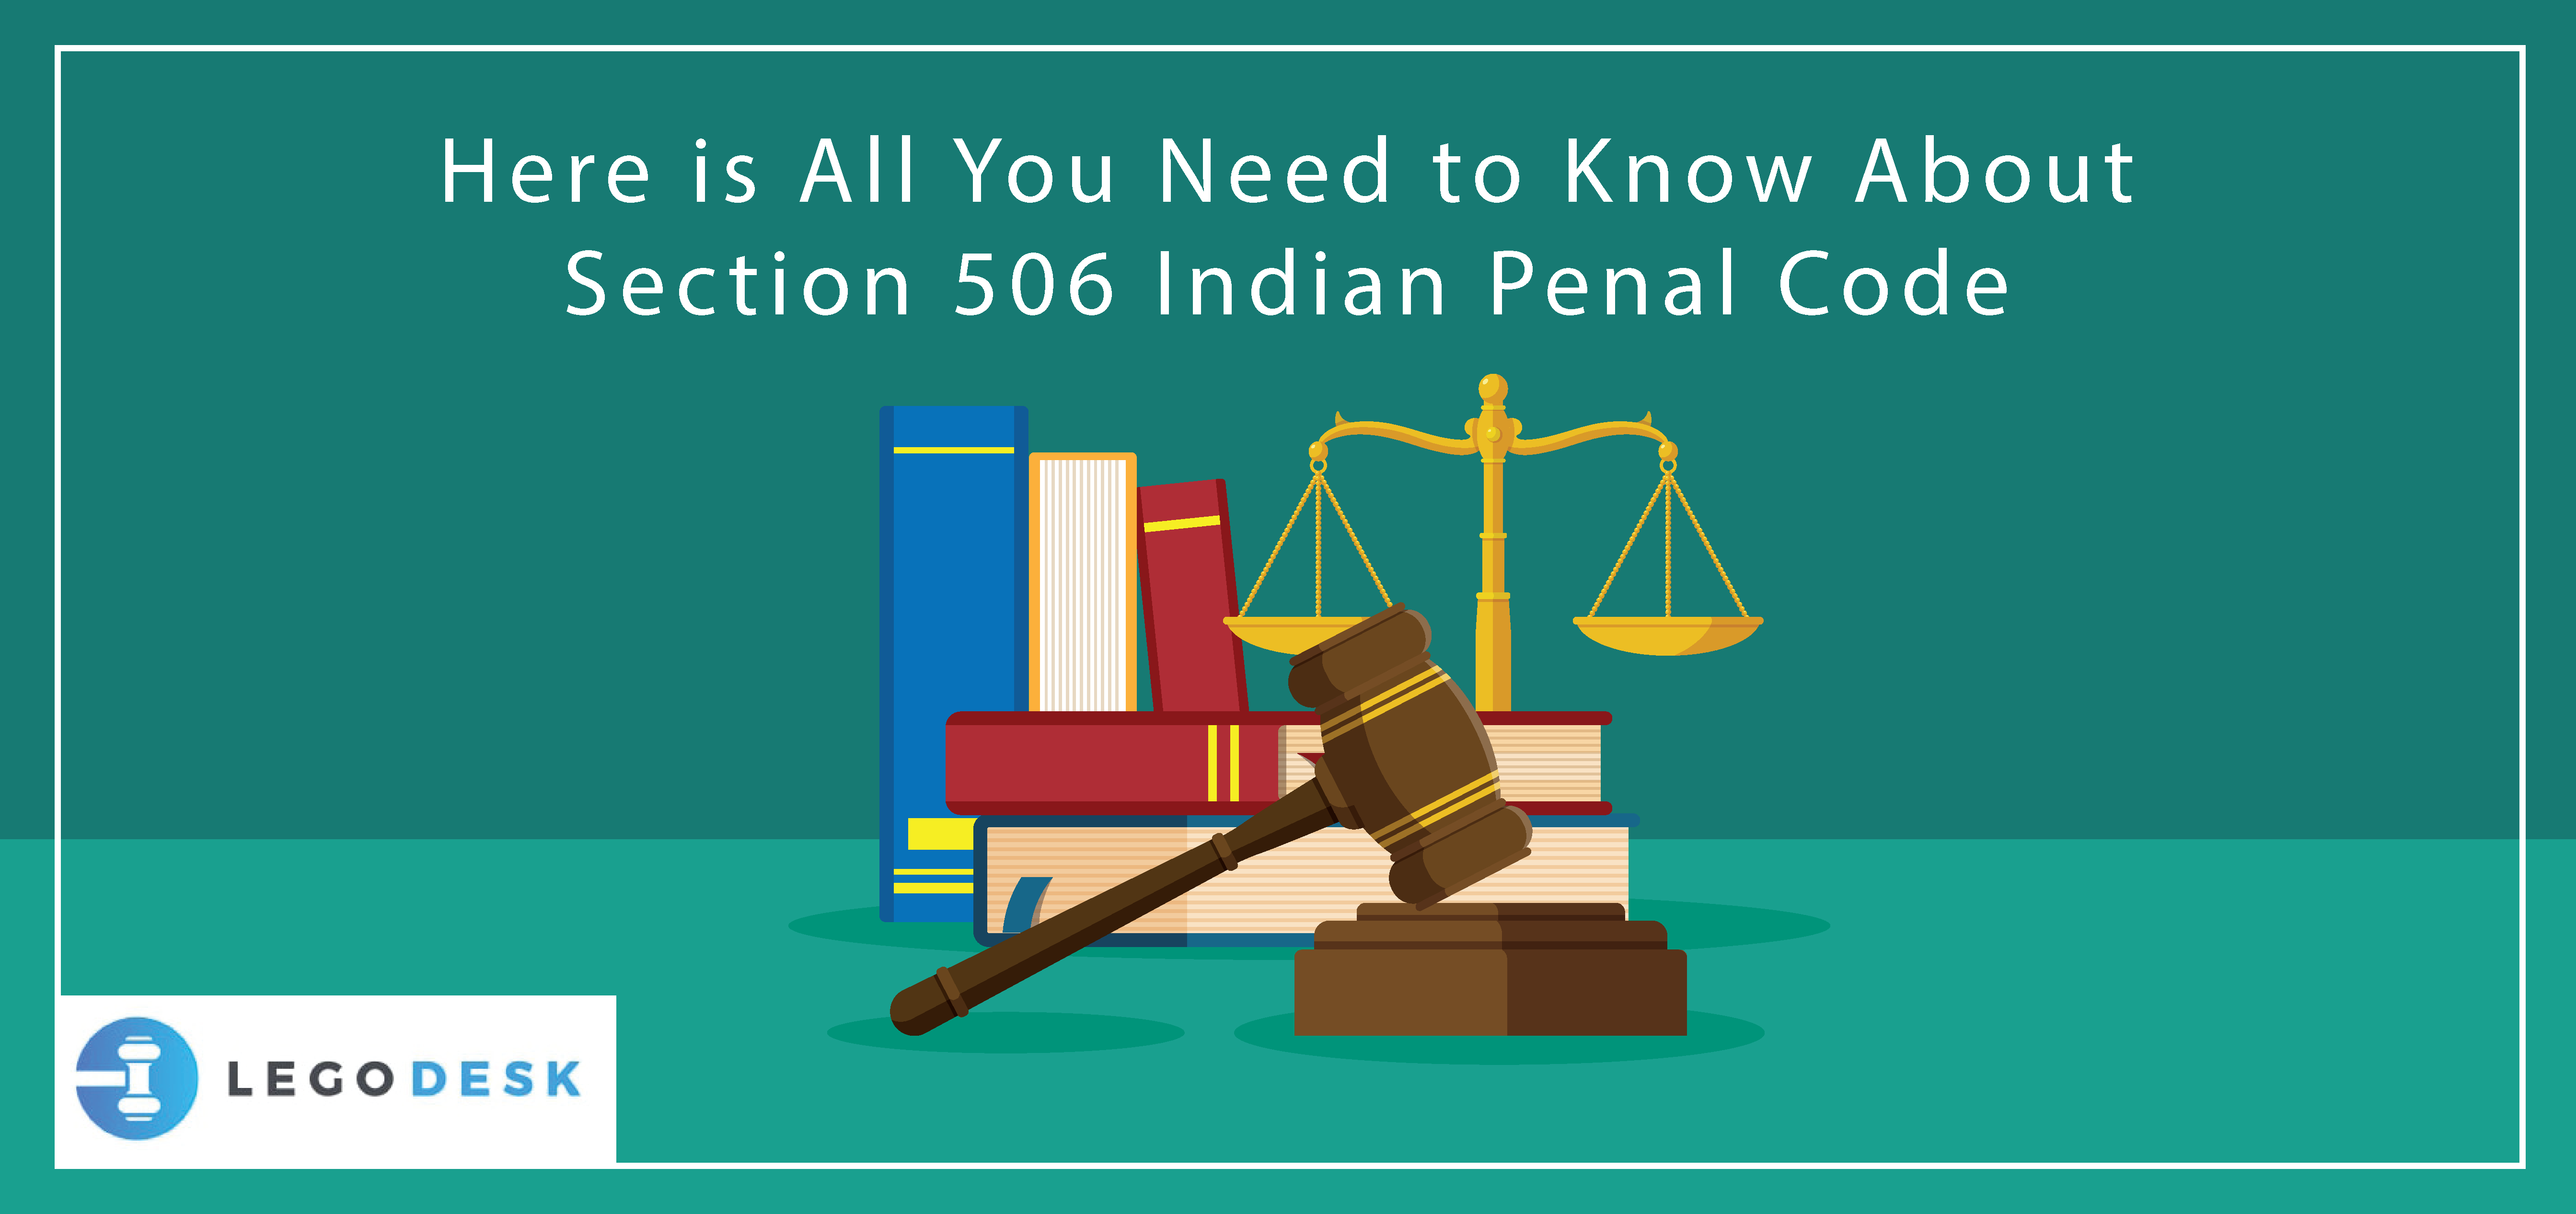 Everything About Section 506 Indian Penal Code